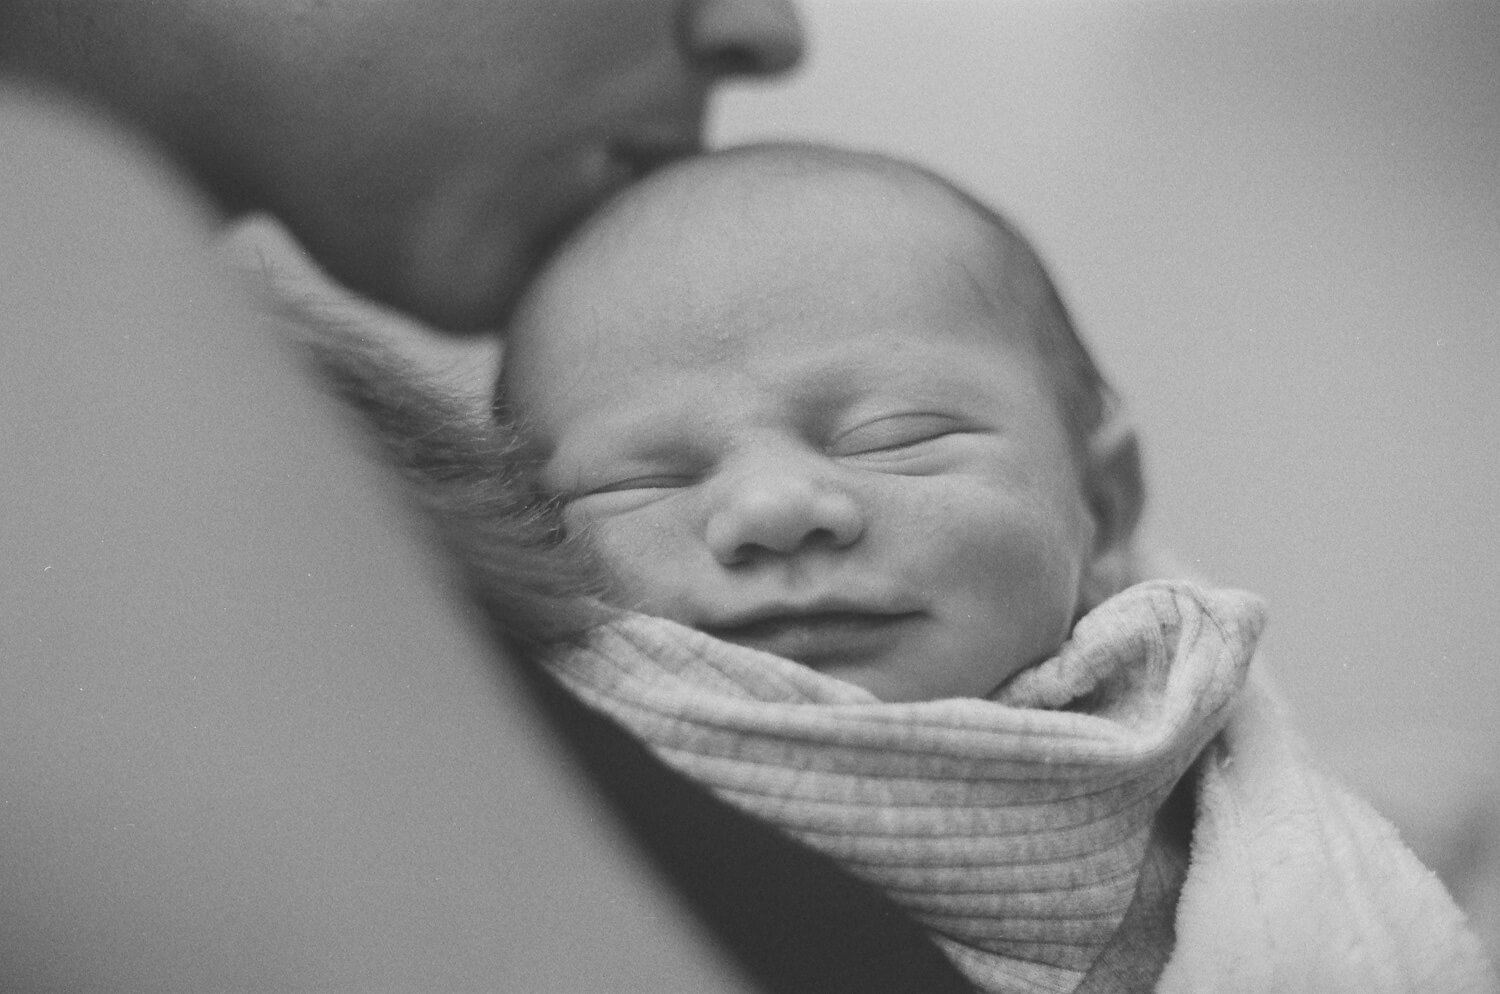 8 Frames... Of my newborn son on ILFORD HP5 PLUS (35mm Format / Nikon Nikkormat / Nikkor 50mm f/1.4 AI-S) - by Spencer Cameron 